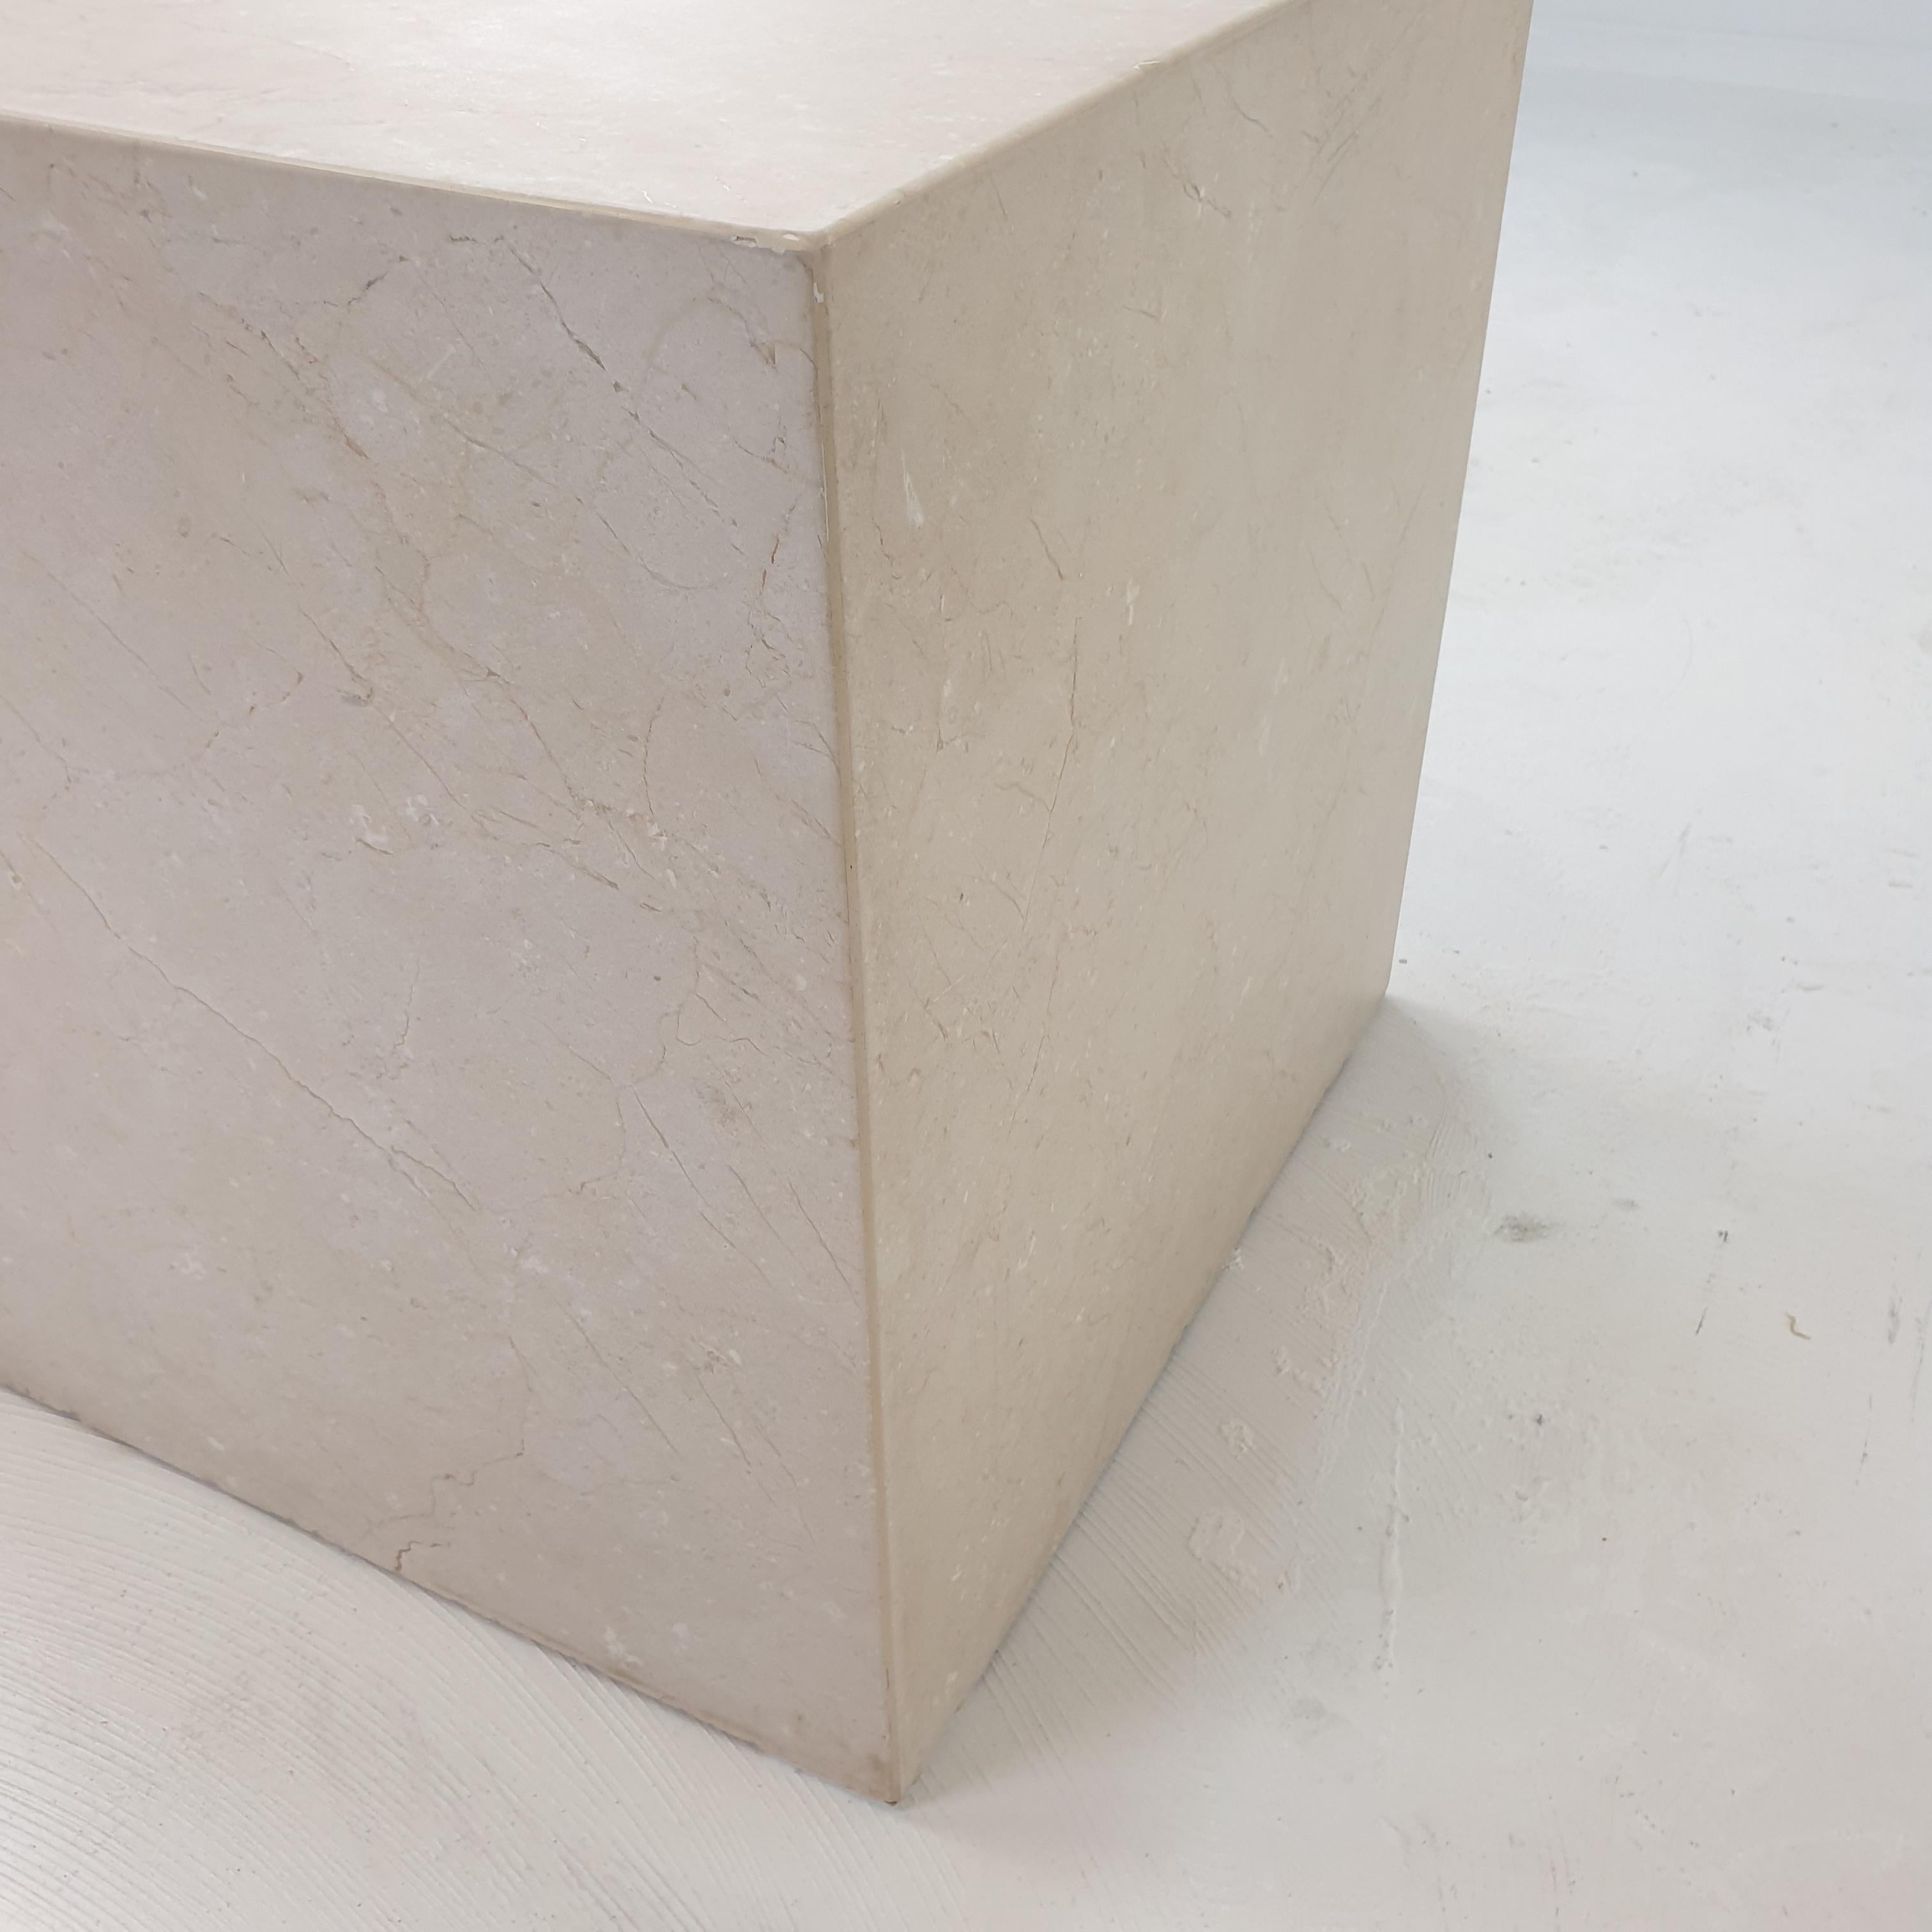 Italian Travertine Pedestal or Side Table, 1980's For Sale 12